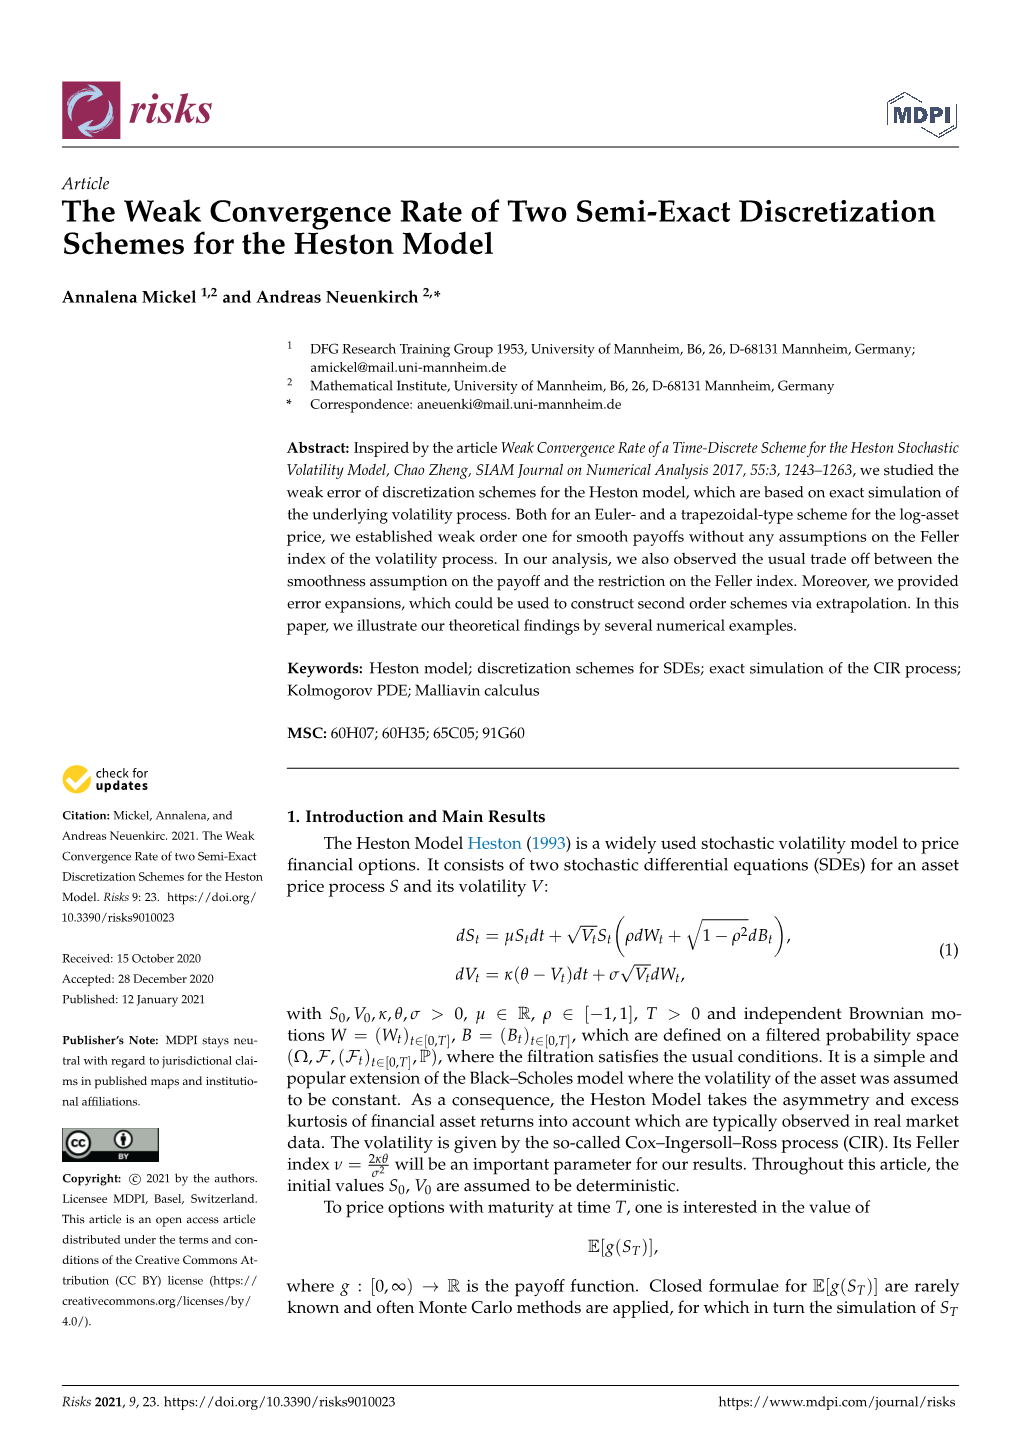 The Weak Convergence Rate of Two Semi-Exact Discretization Schemes for the Heston Model